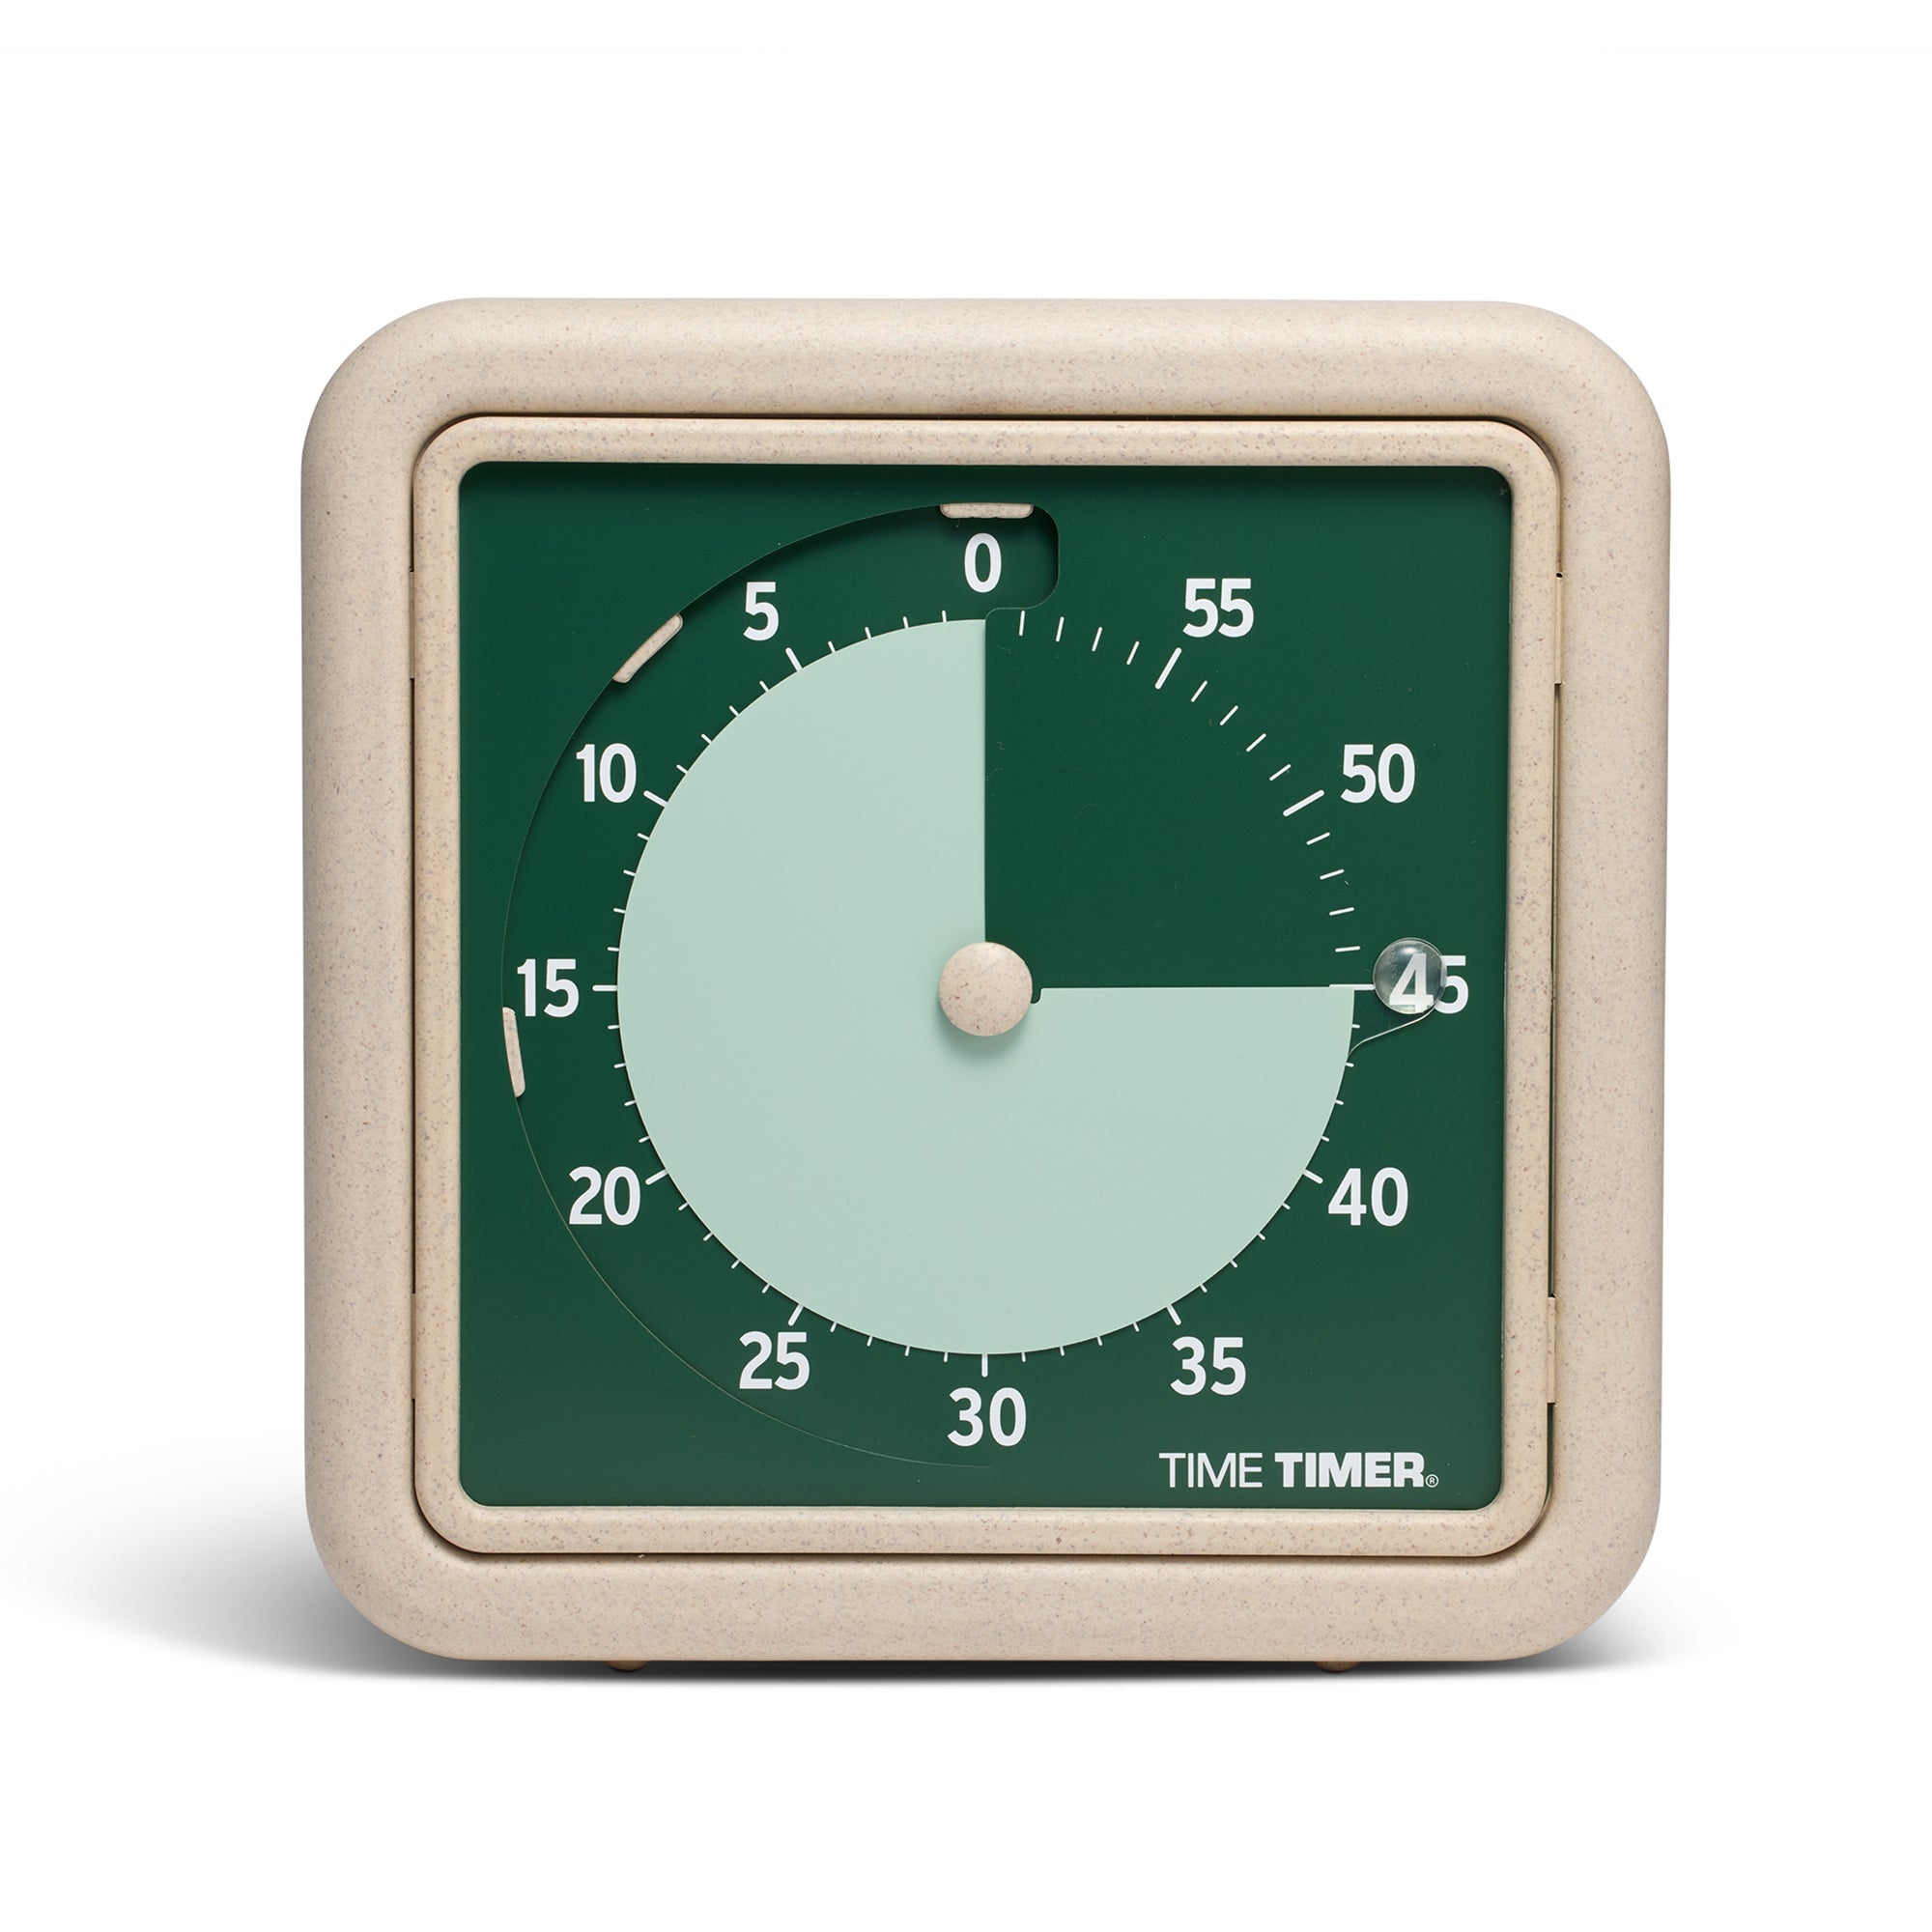 The Time Timer RETRO - Eco Edition in the "Green Land" variant color is shown straight on. This 60-minute visual timer with a textured beige frame, a dark green background and a light green disk. The disk is set at the 45 minute duration. 